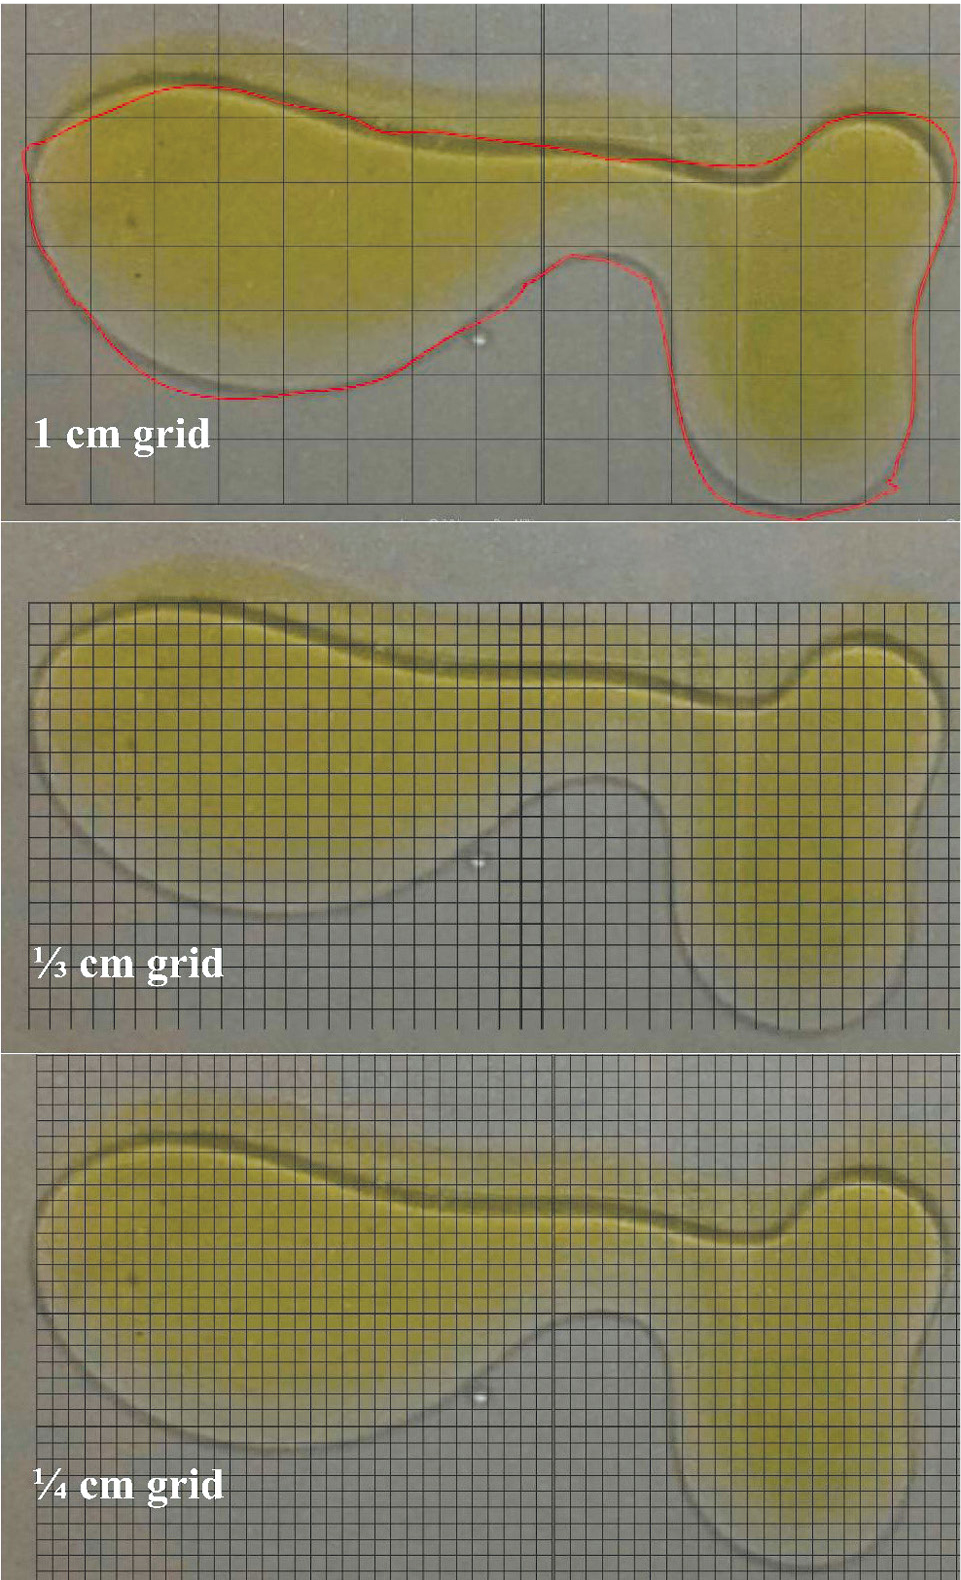 Different grid sizes overlaid on the spill to estimate the area of an oil spill.